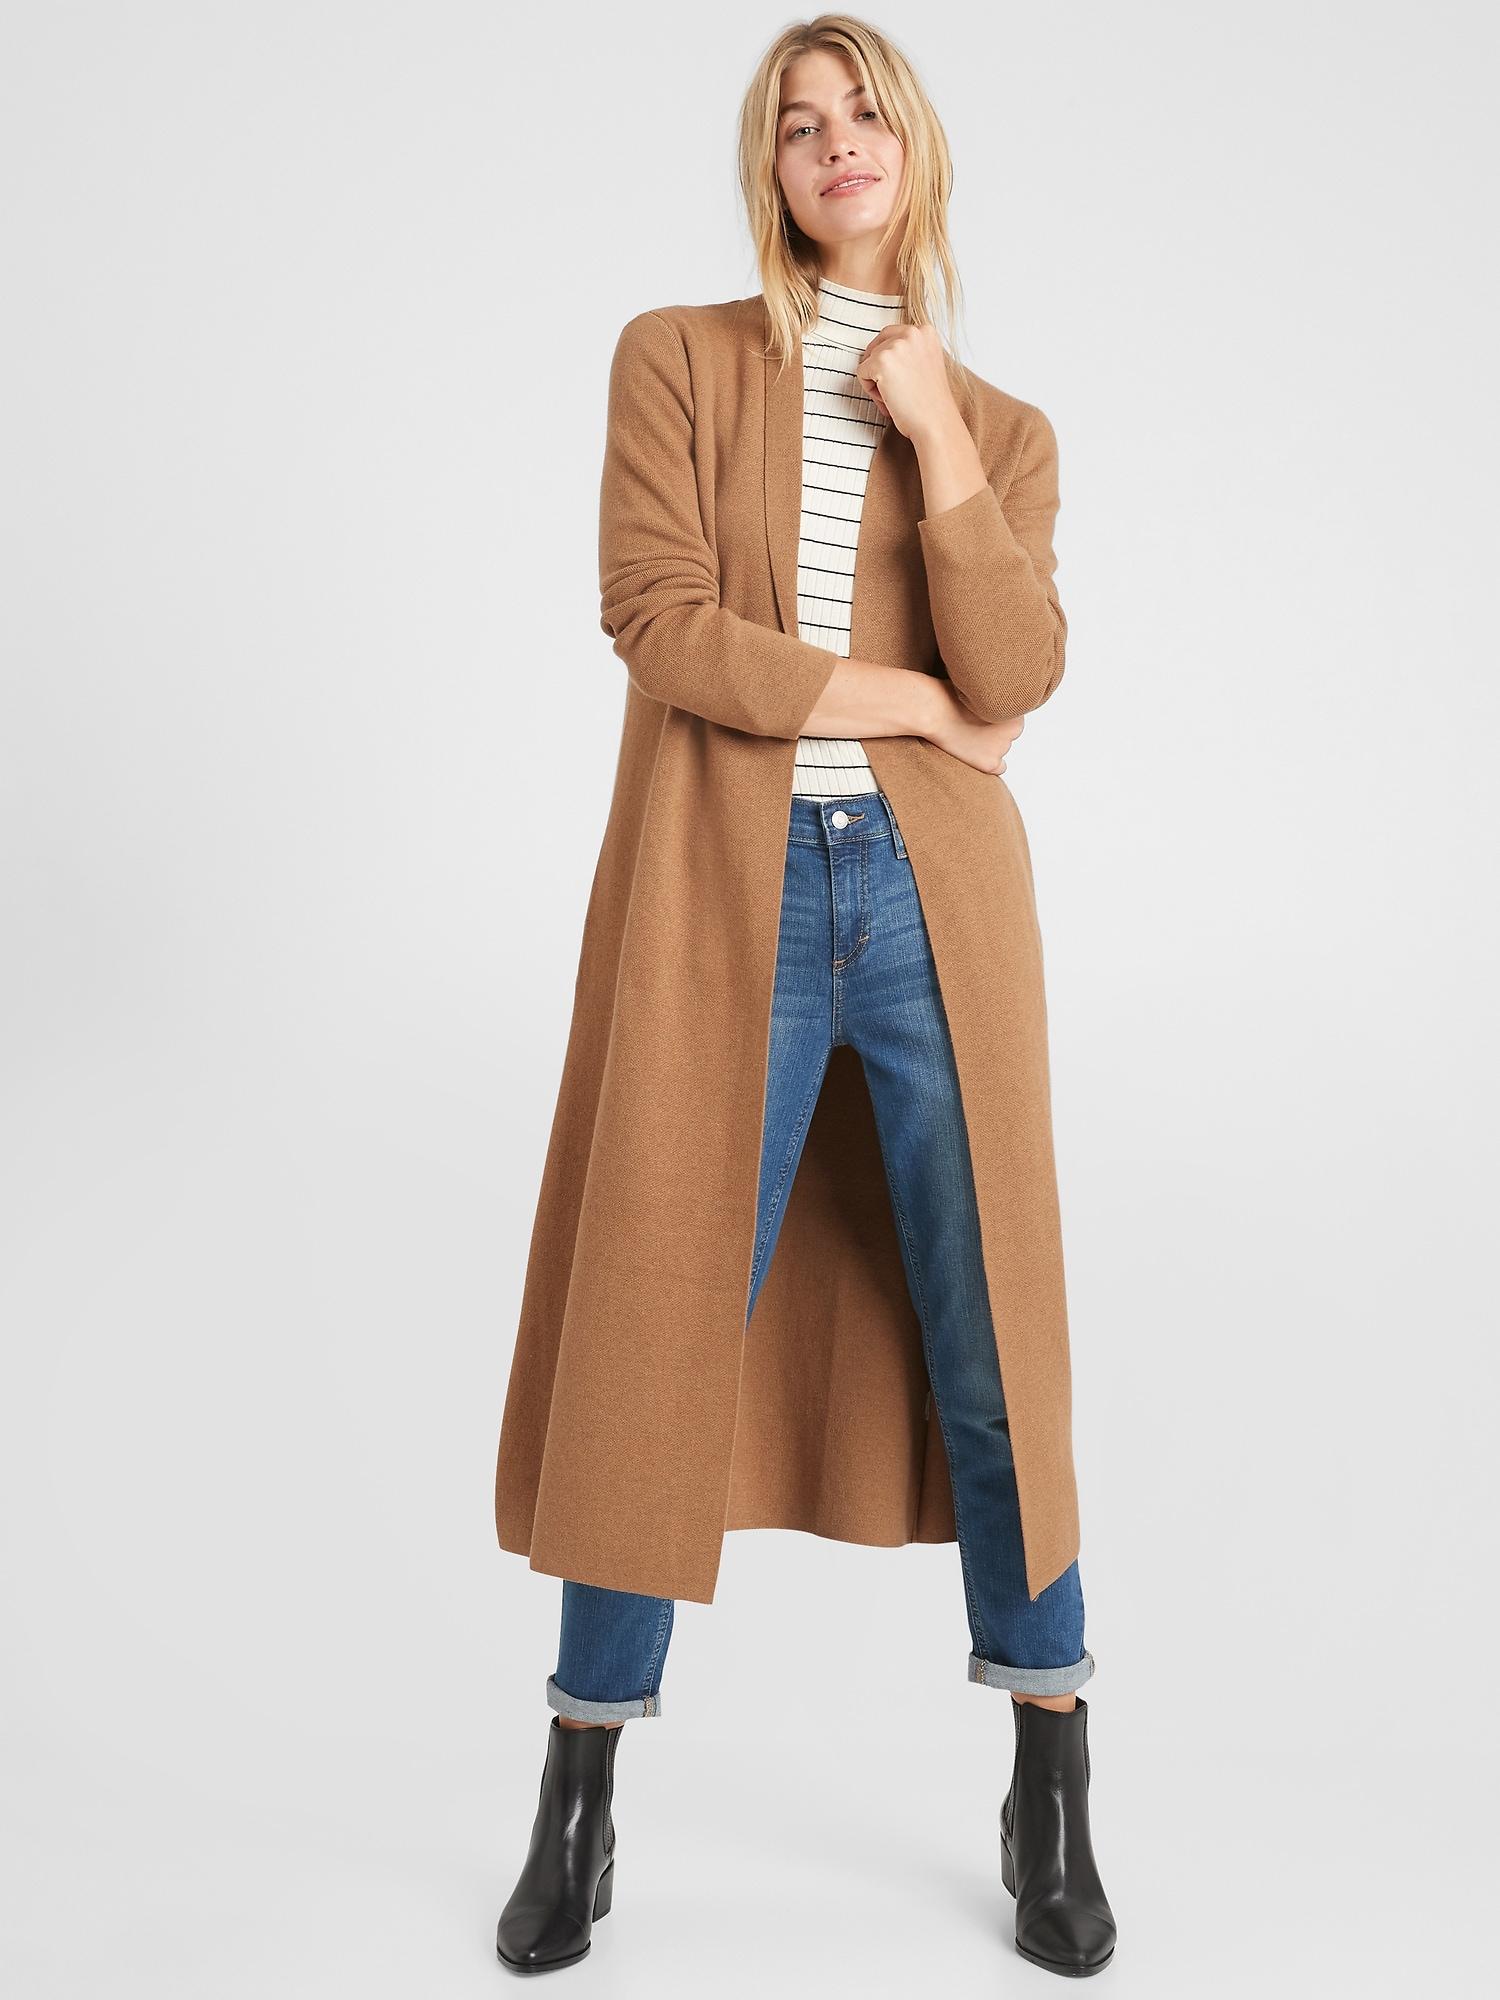 Banana Republic Factory Structured Sweater Coat in Camel (Blue) - Lyst